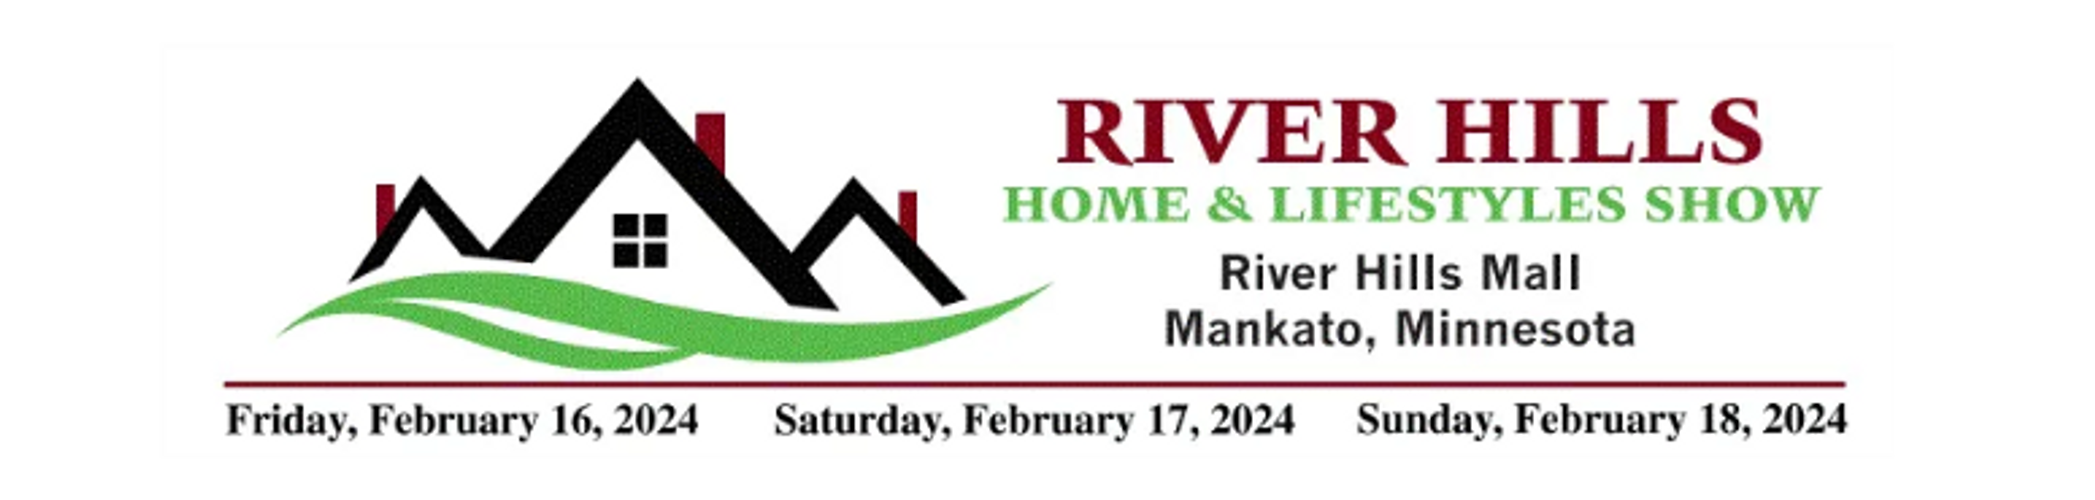 River Hills Home & Lifestyles Show